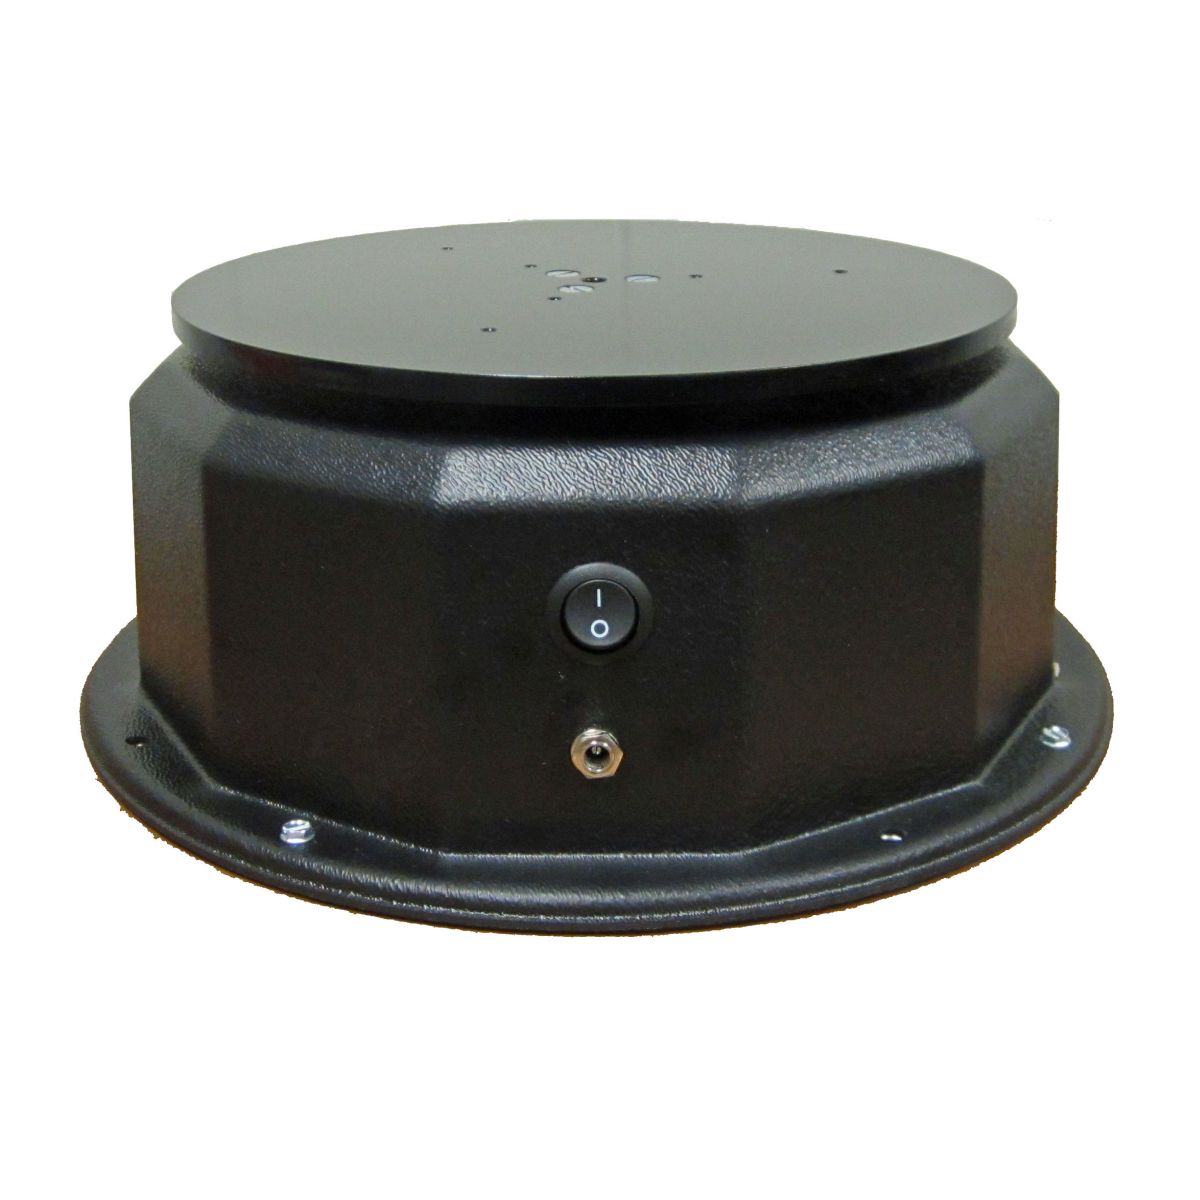 Motorized Display Turntable for Trades Shows, Retail, Photography, and More  - 200 lbs Capacity